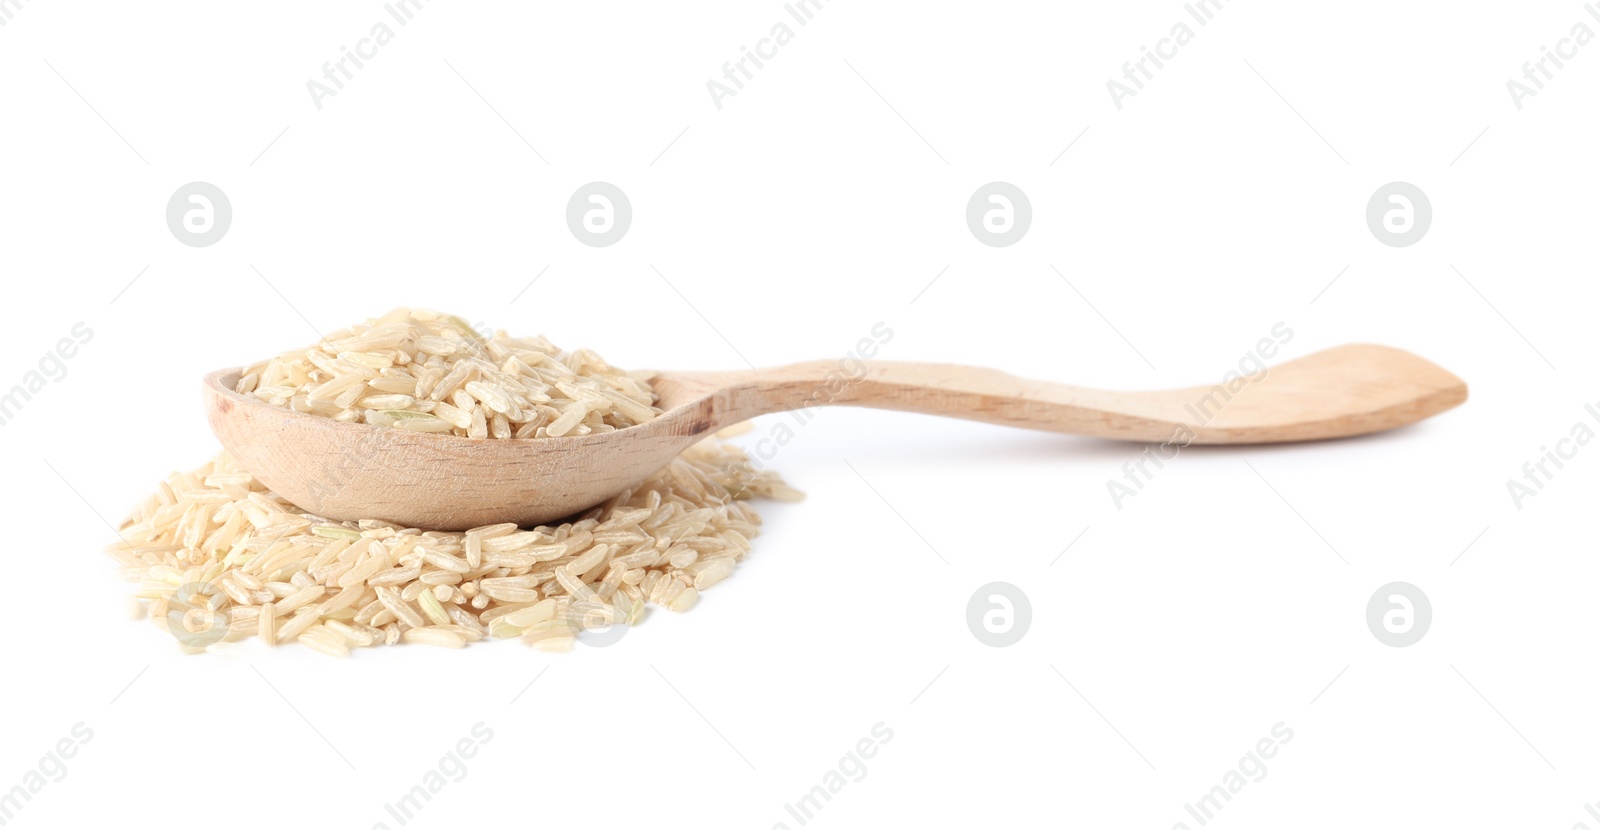 Photo of Spoon and uncooked brown rice on white background